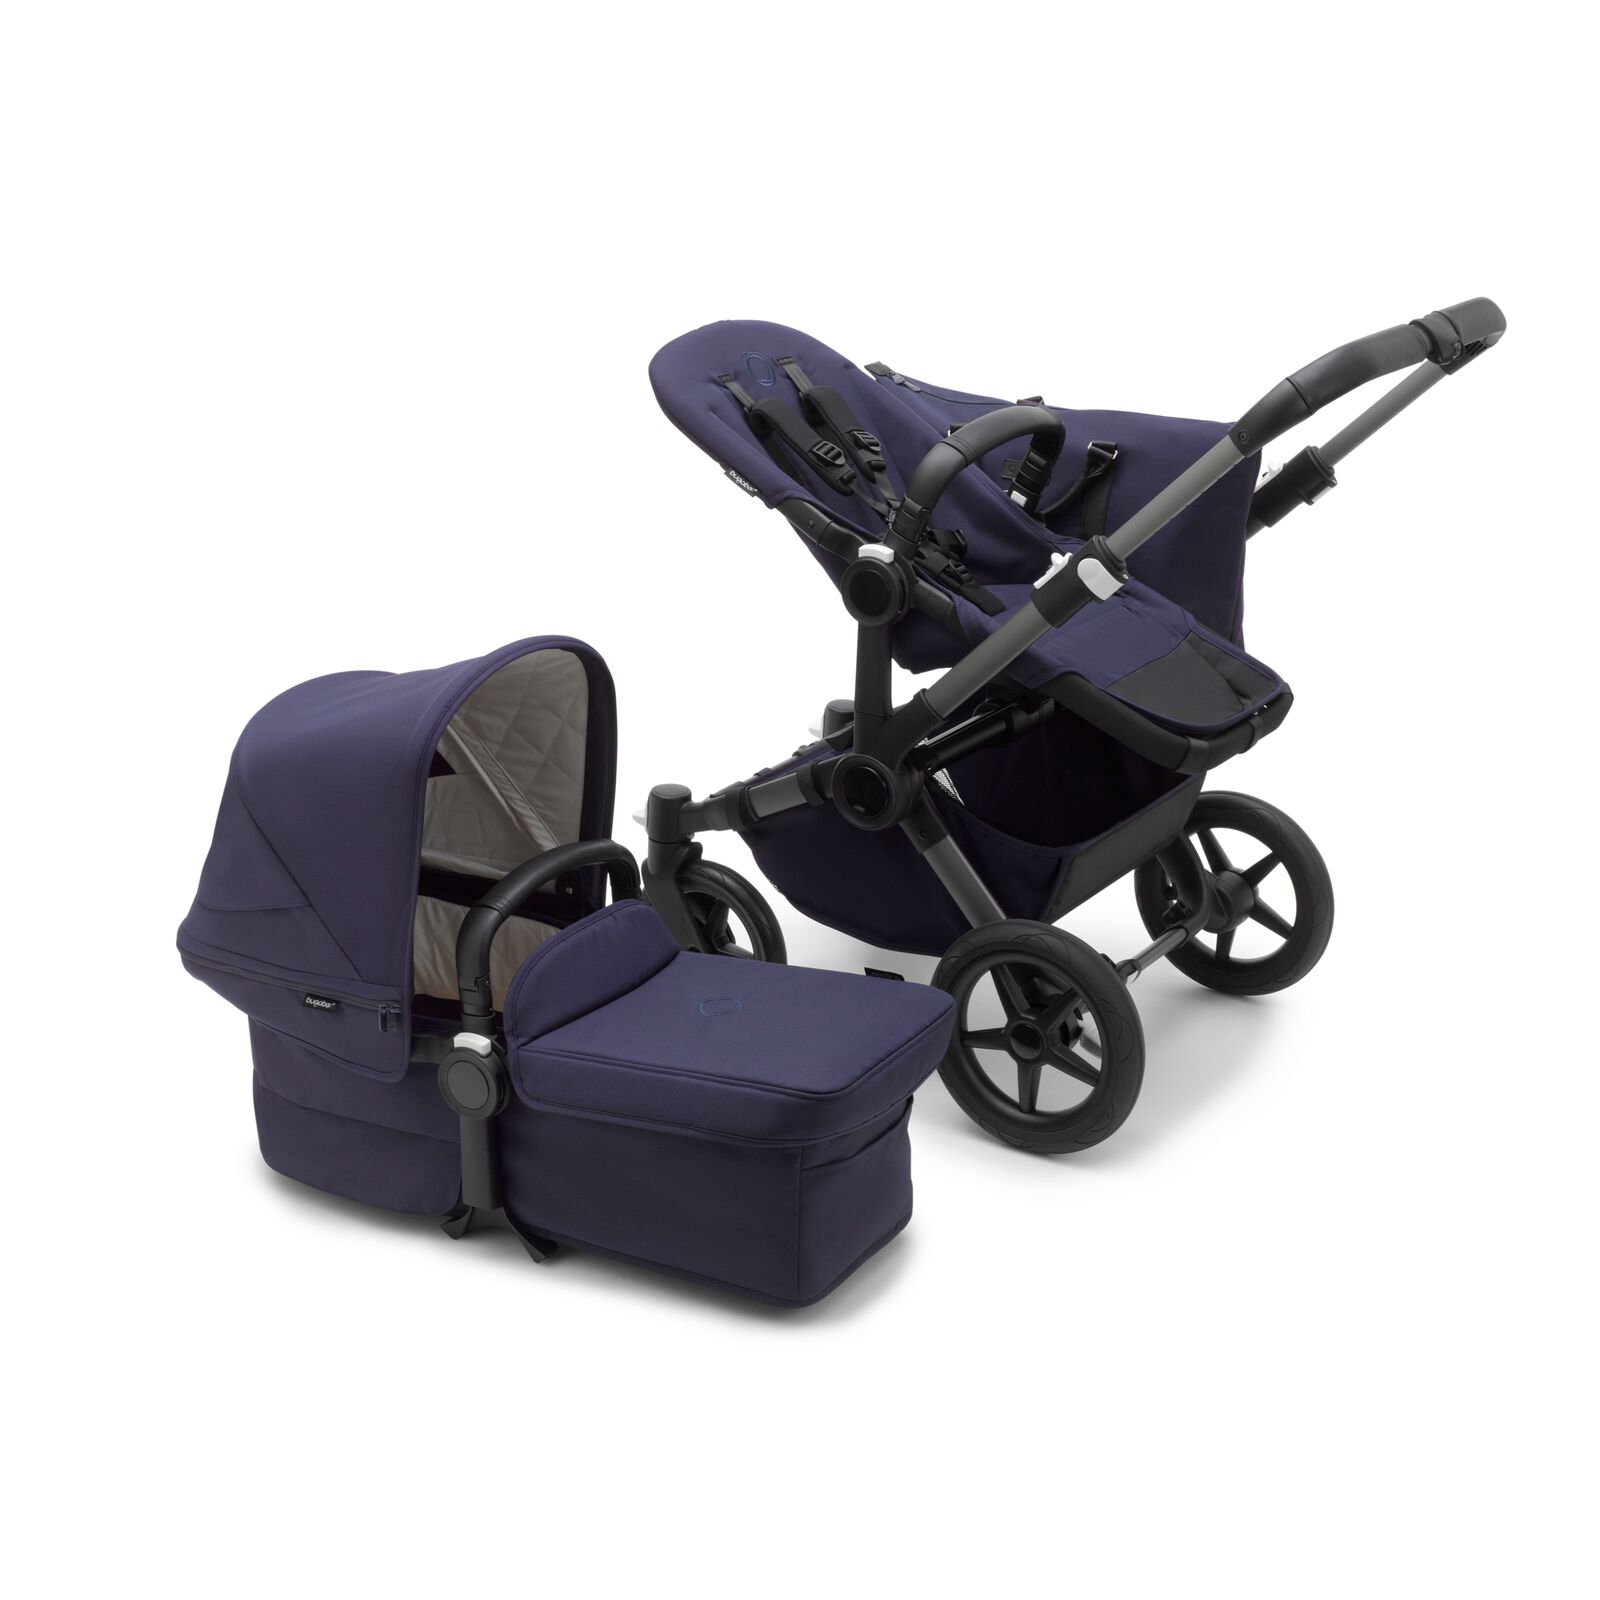 Bugaboo Donkey 5 Mono bassinet and seat stroller - View 6